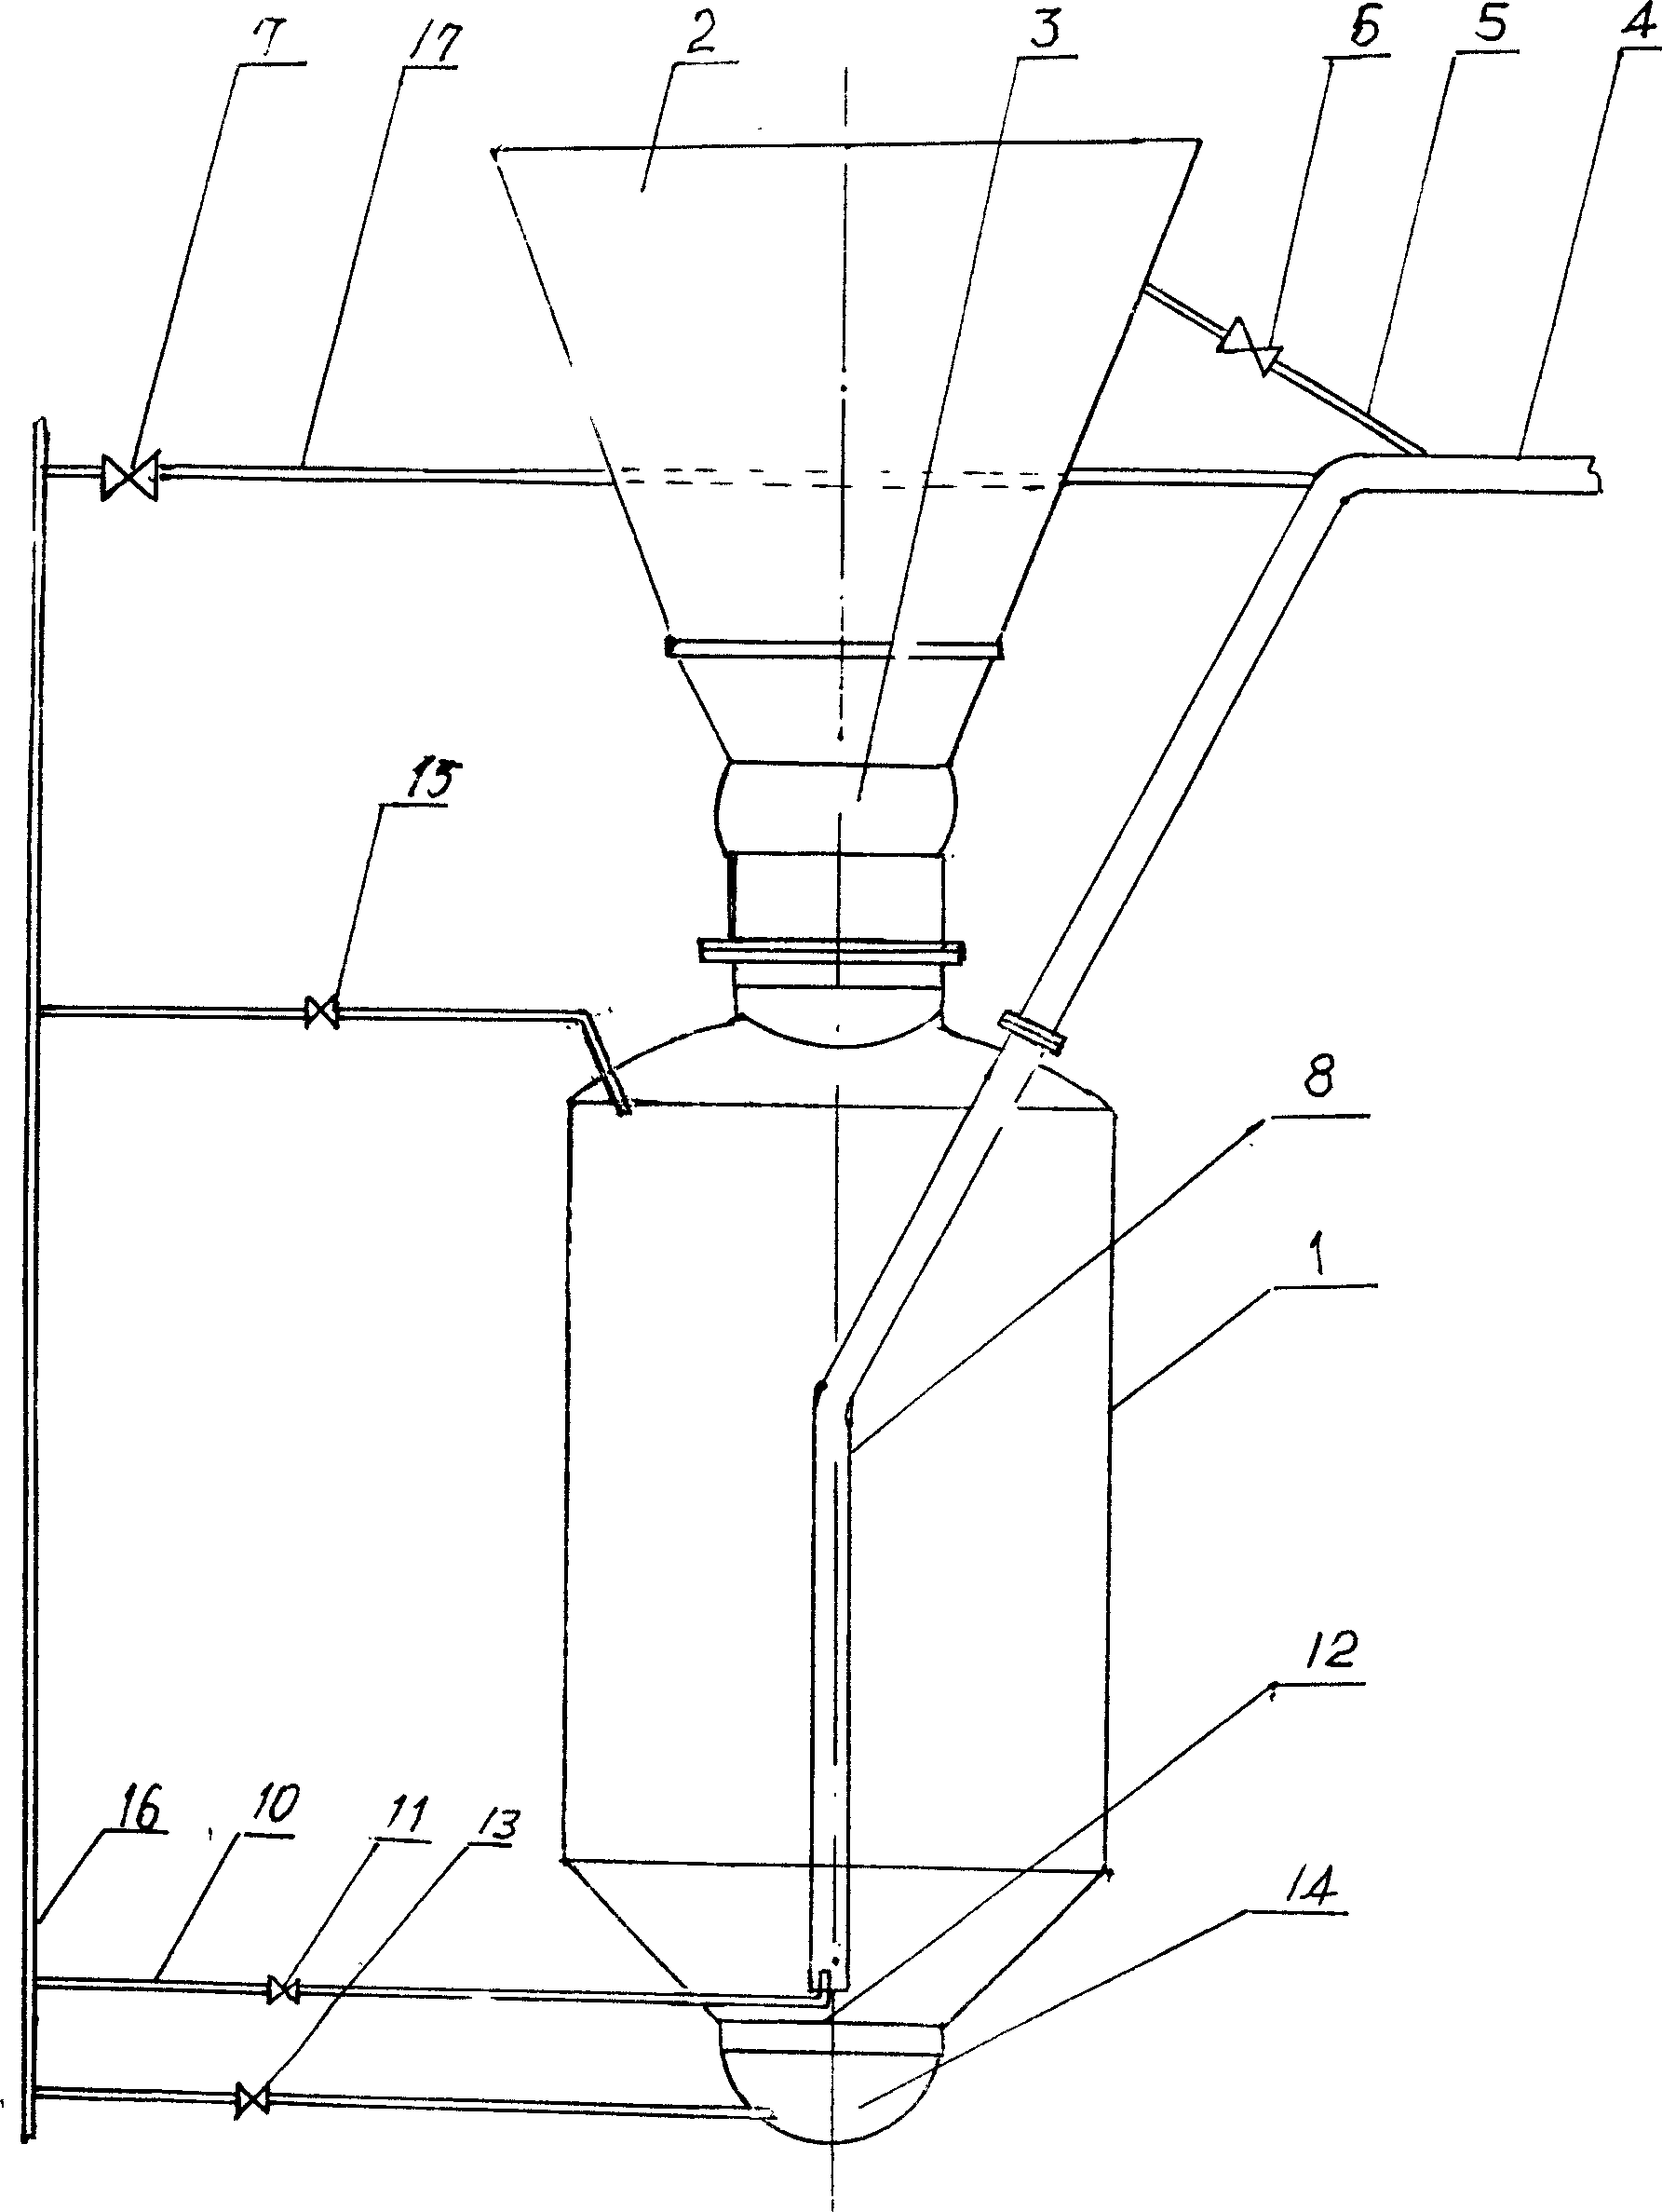 Method of realizing automatic block clearing and continuous operation of up flow type ash cabin pump